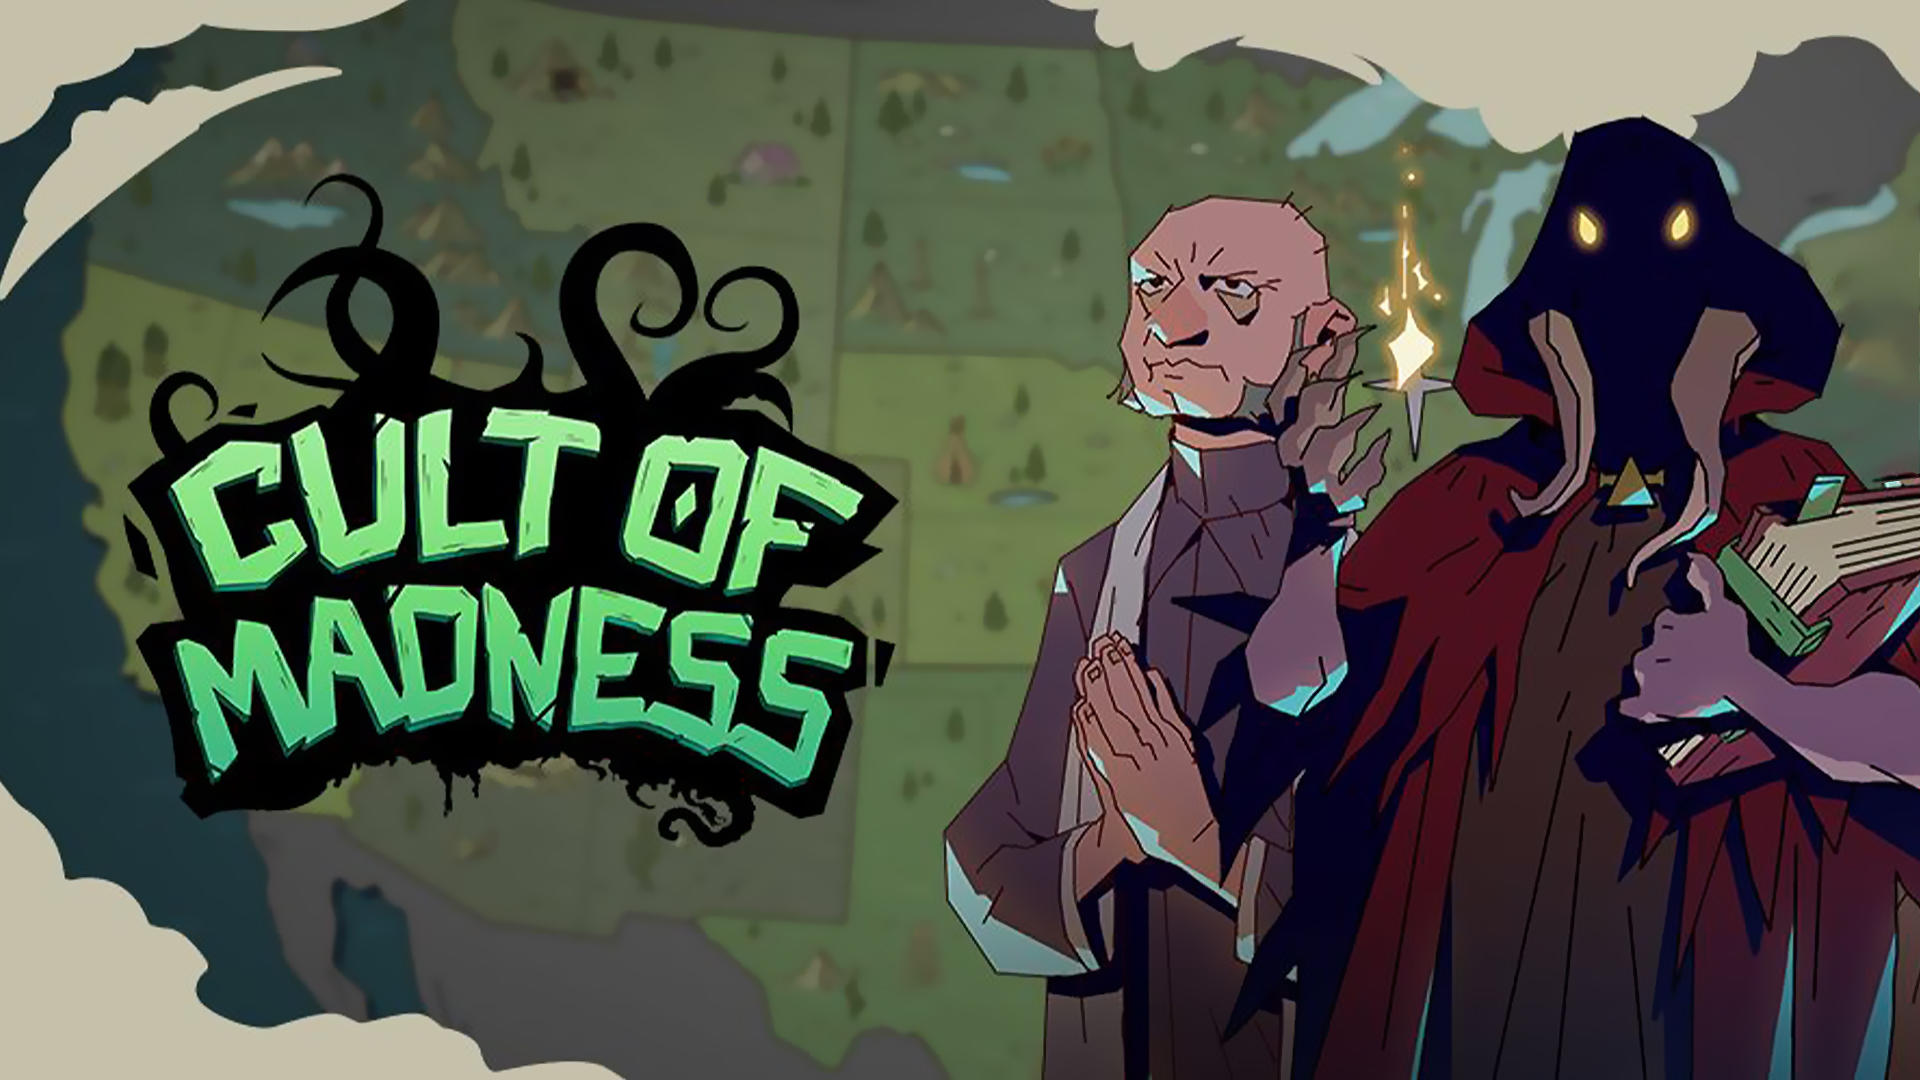 Banner of Cult of Madness - Juego inactivo 0.2.1